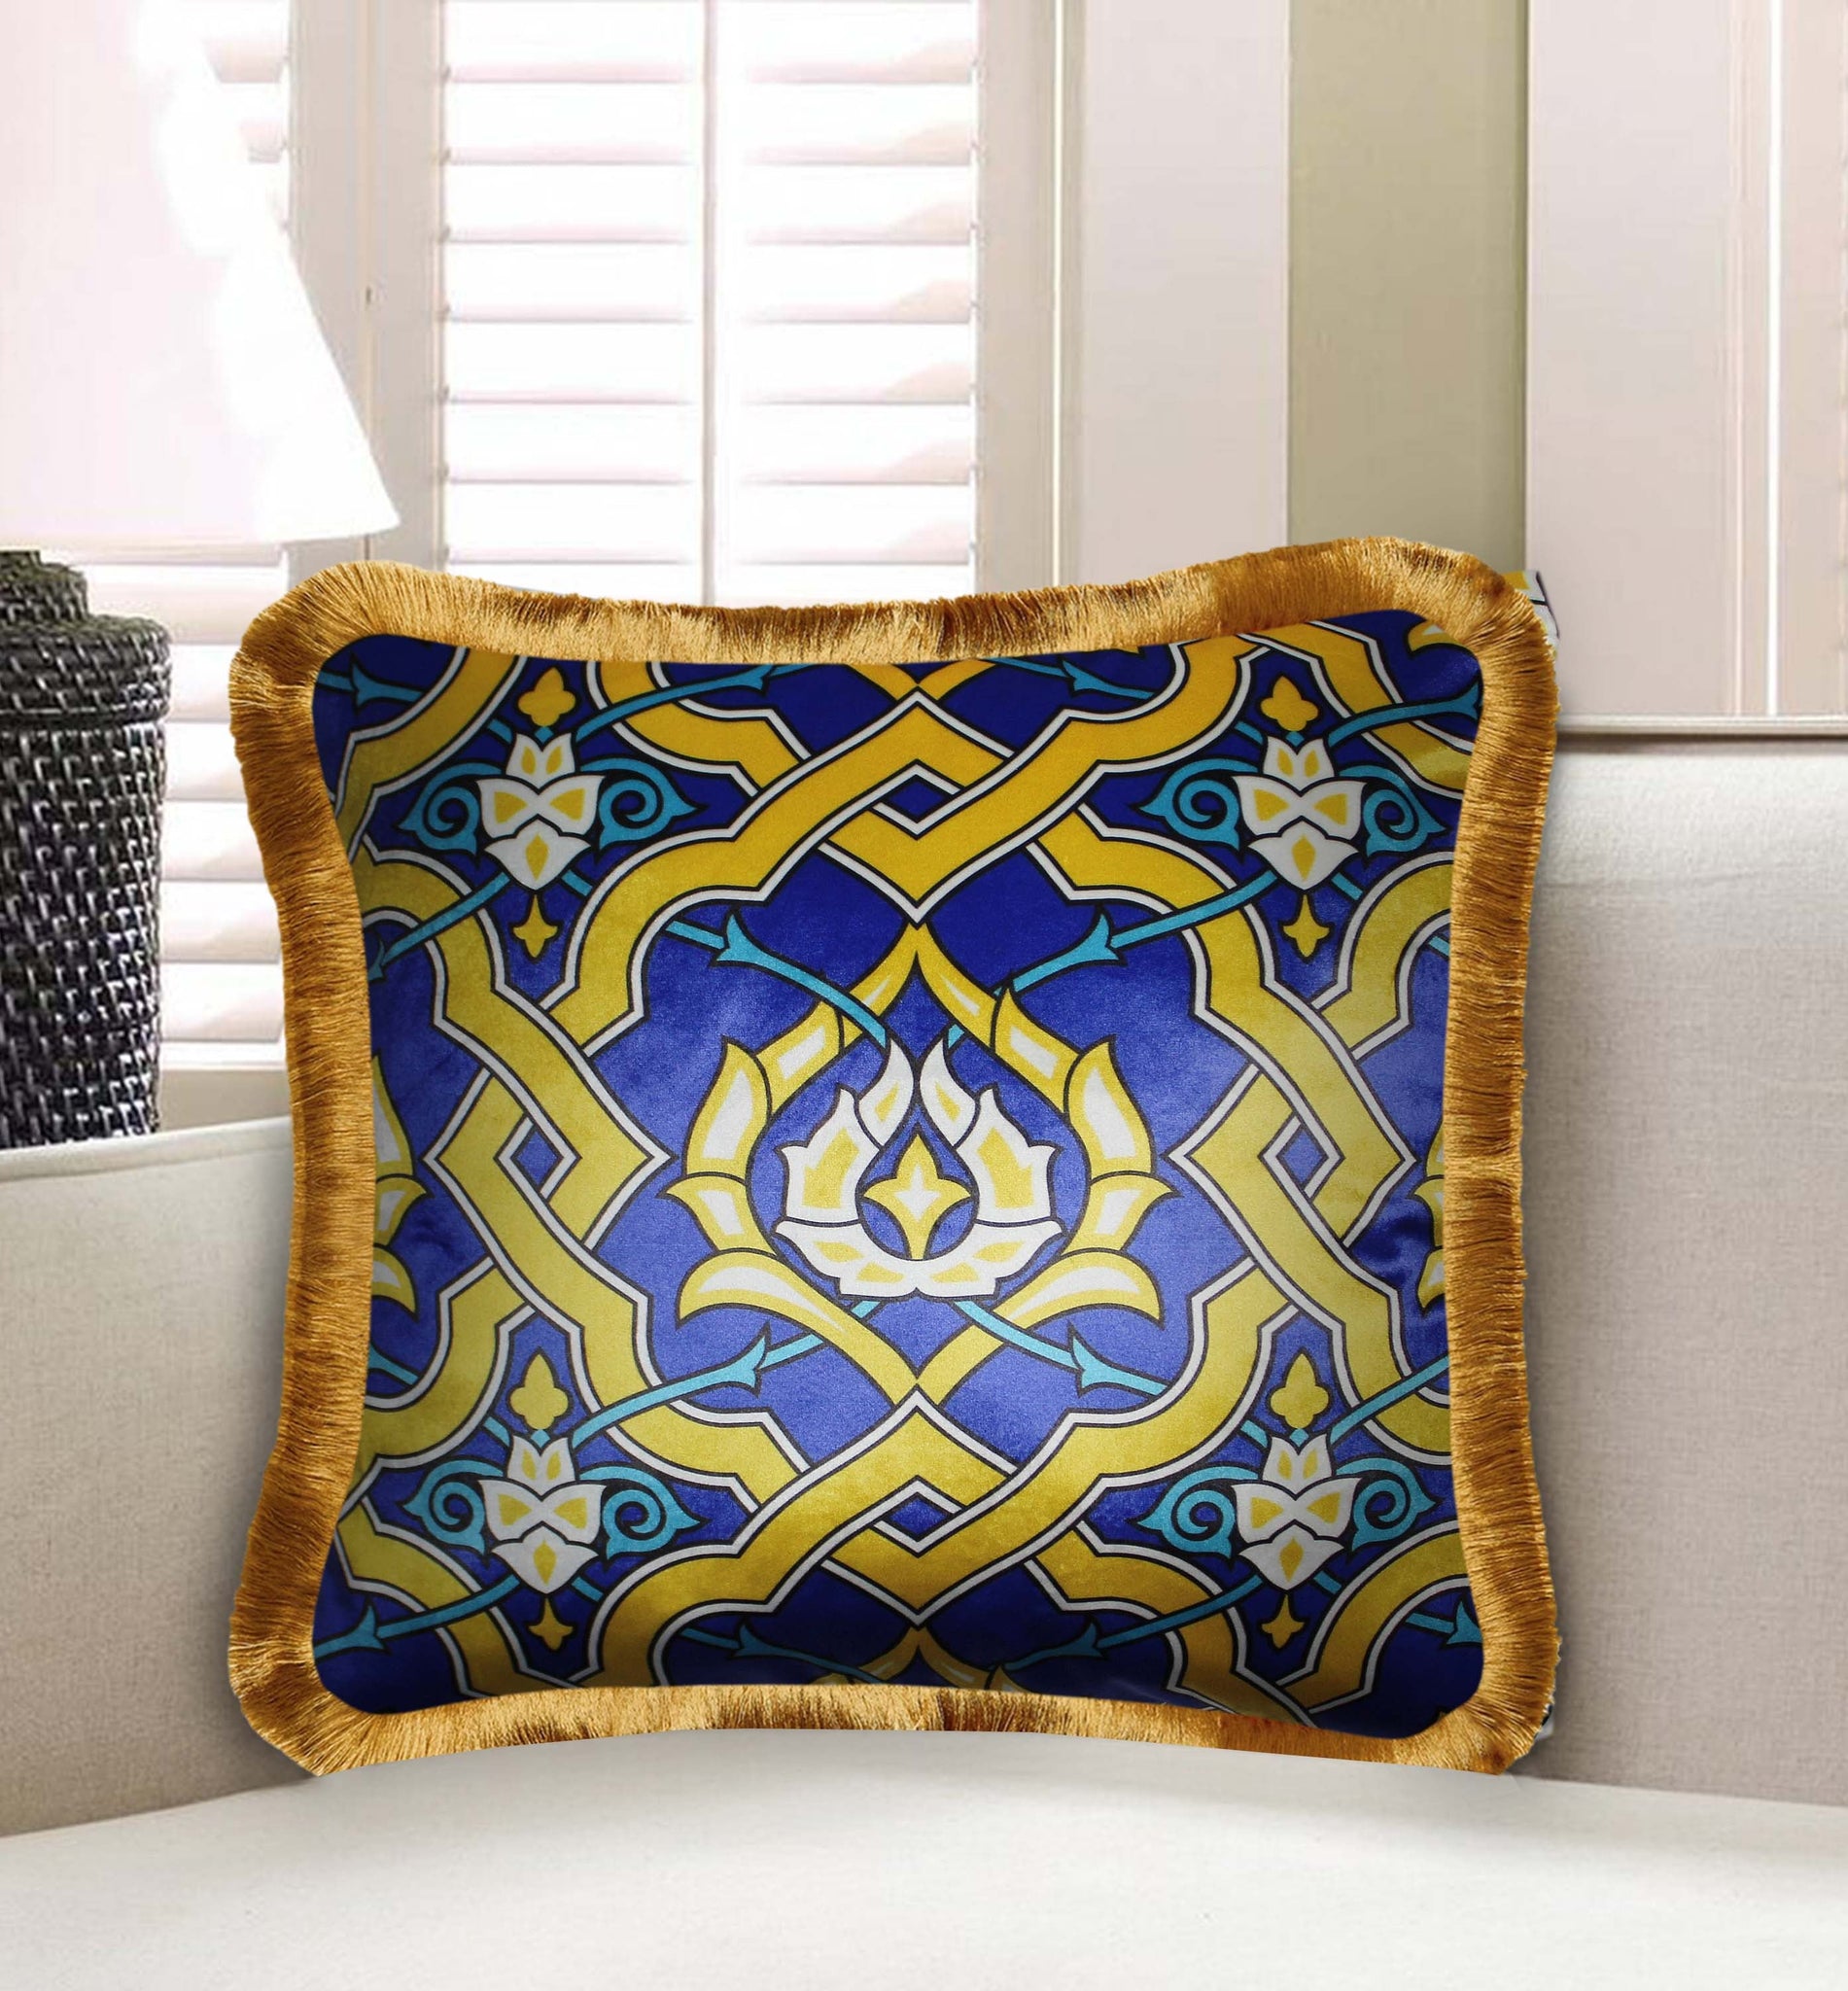 Golden Velvet Cushion Cover Traditional Damsk Floral Motif Decorative Pillowcase Classic Home Decor Throw Pillow for Sofa Chair Couch Bedroom 45x45 cm 18x18 In